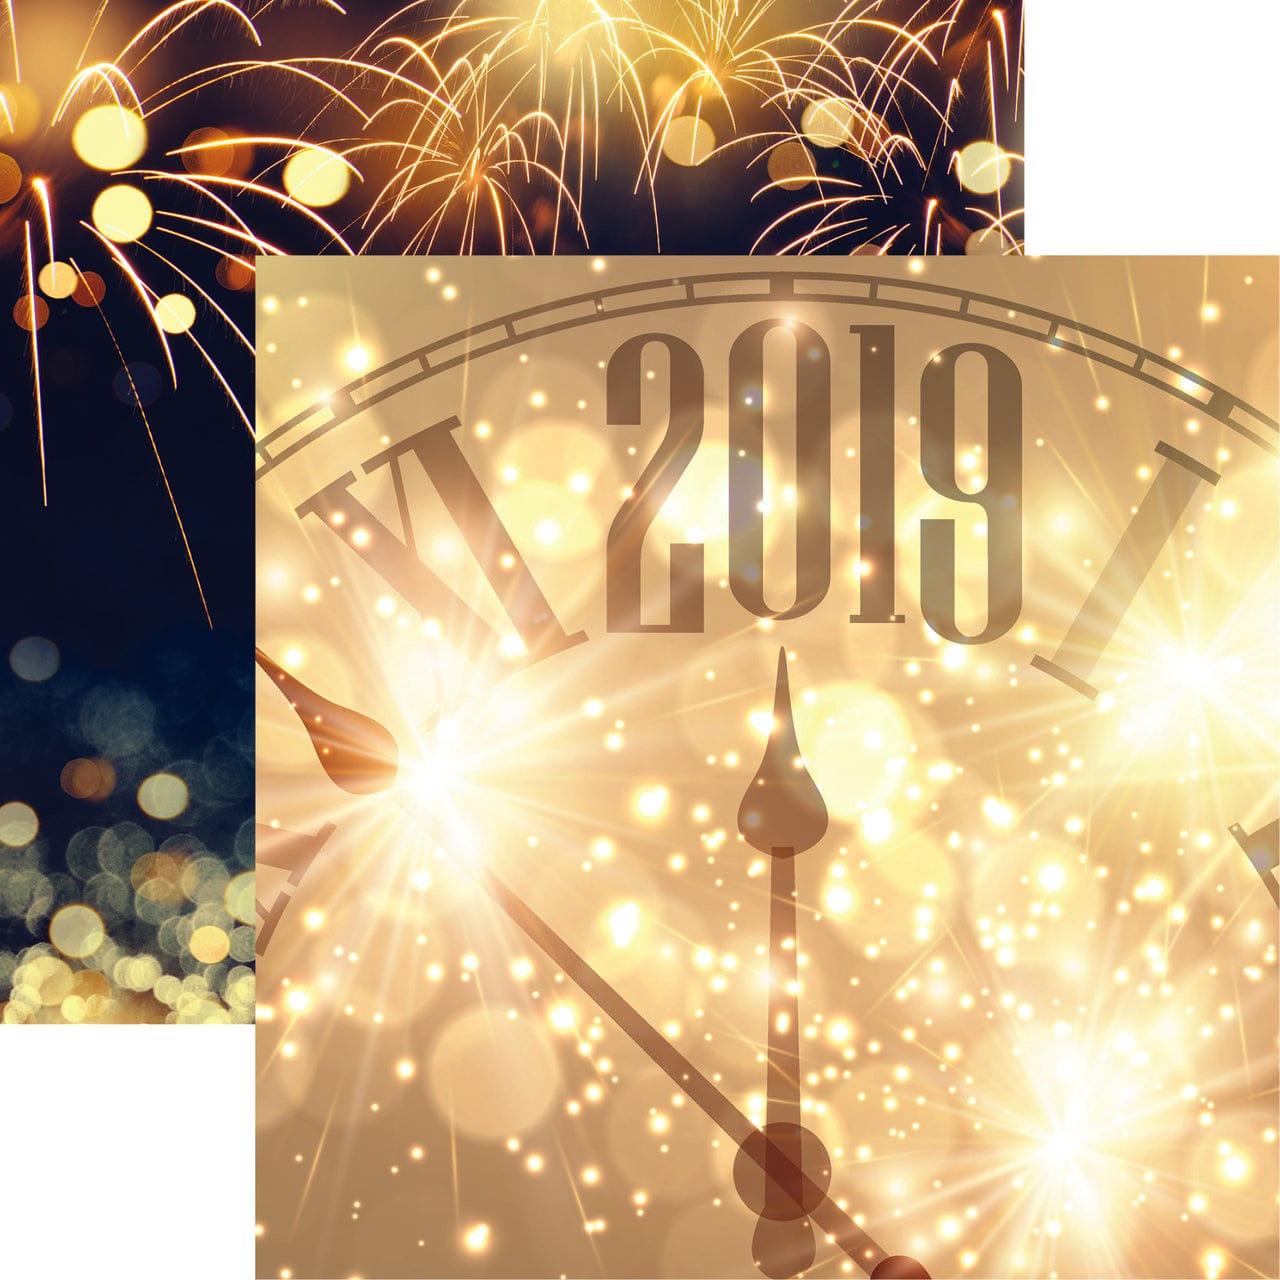 New Year's 2019 Happy 2019 12 x 12 Double-Sided Scrapbook Paper by Reminisce - Scrapbook Supply Companies